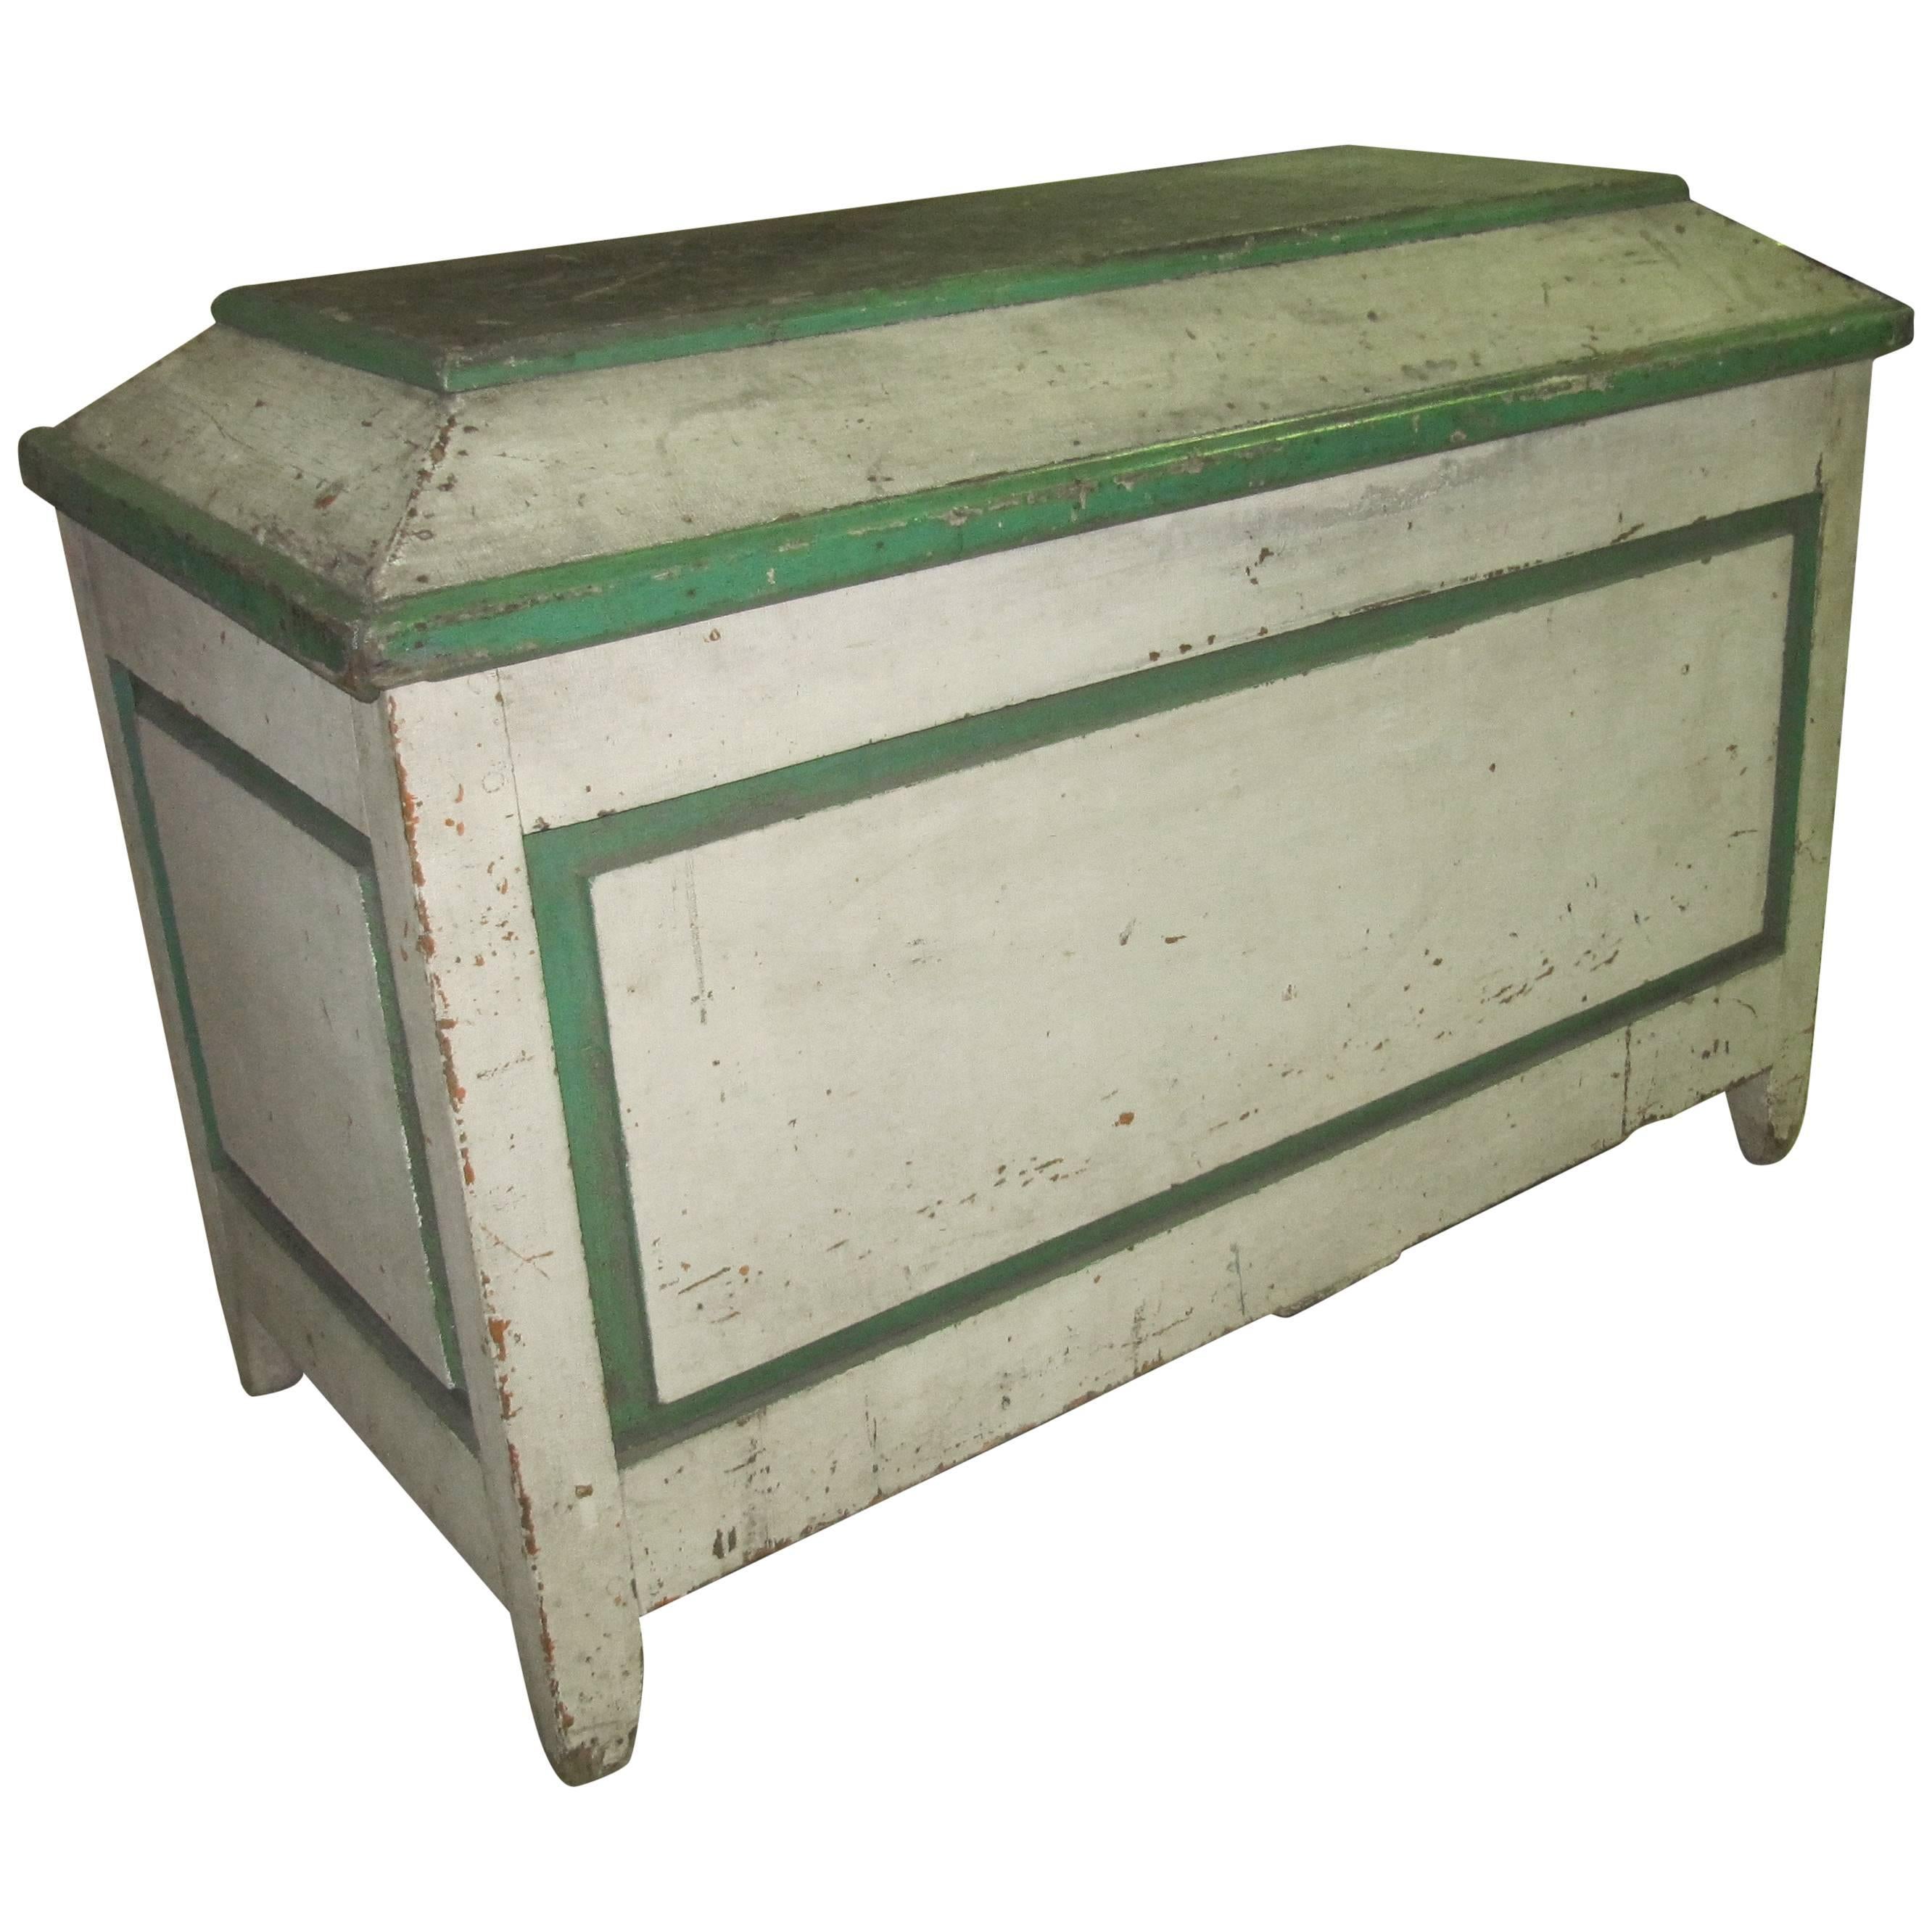 Handsome American Primative Blanket Chest with Wonderful Worn Painted Finish